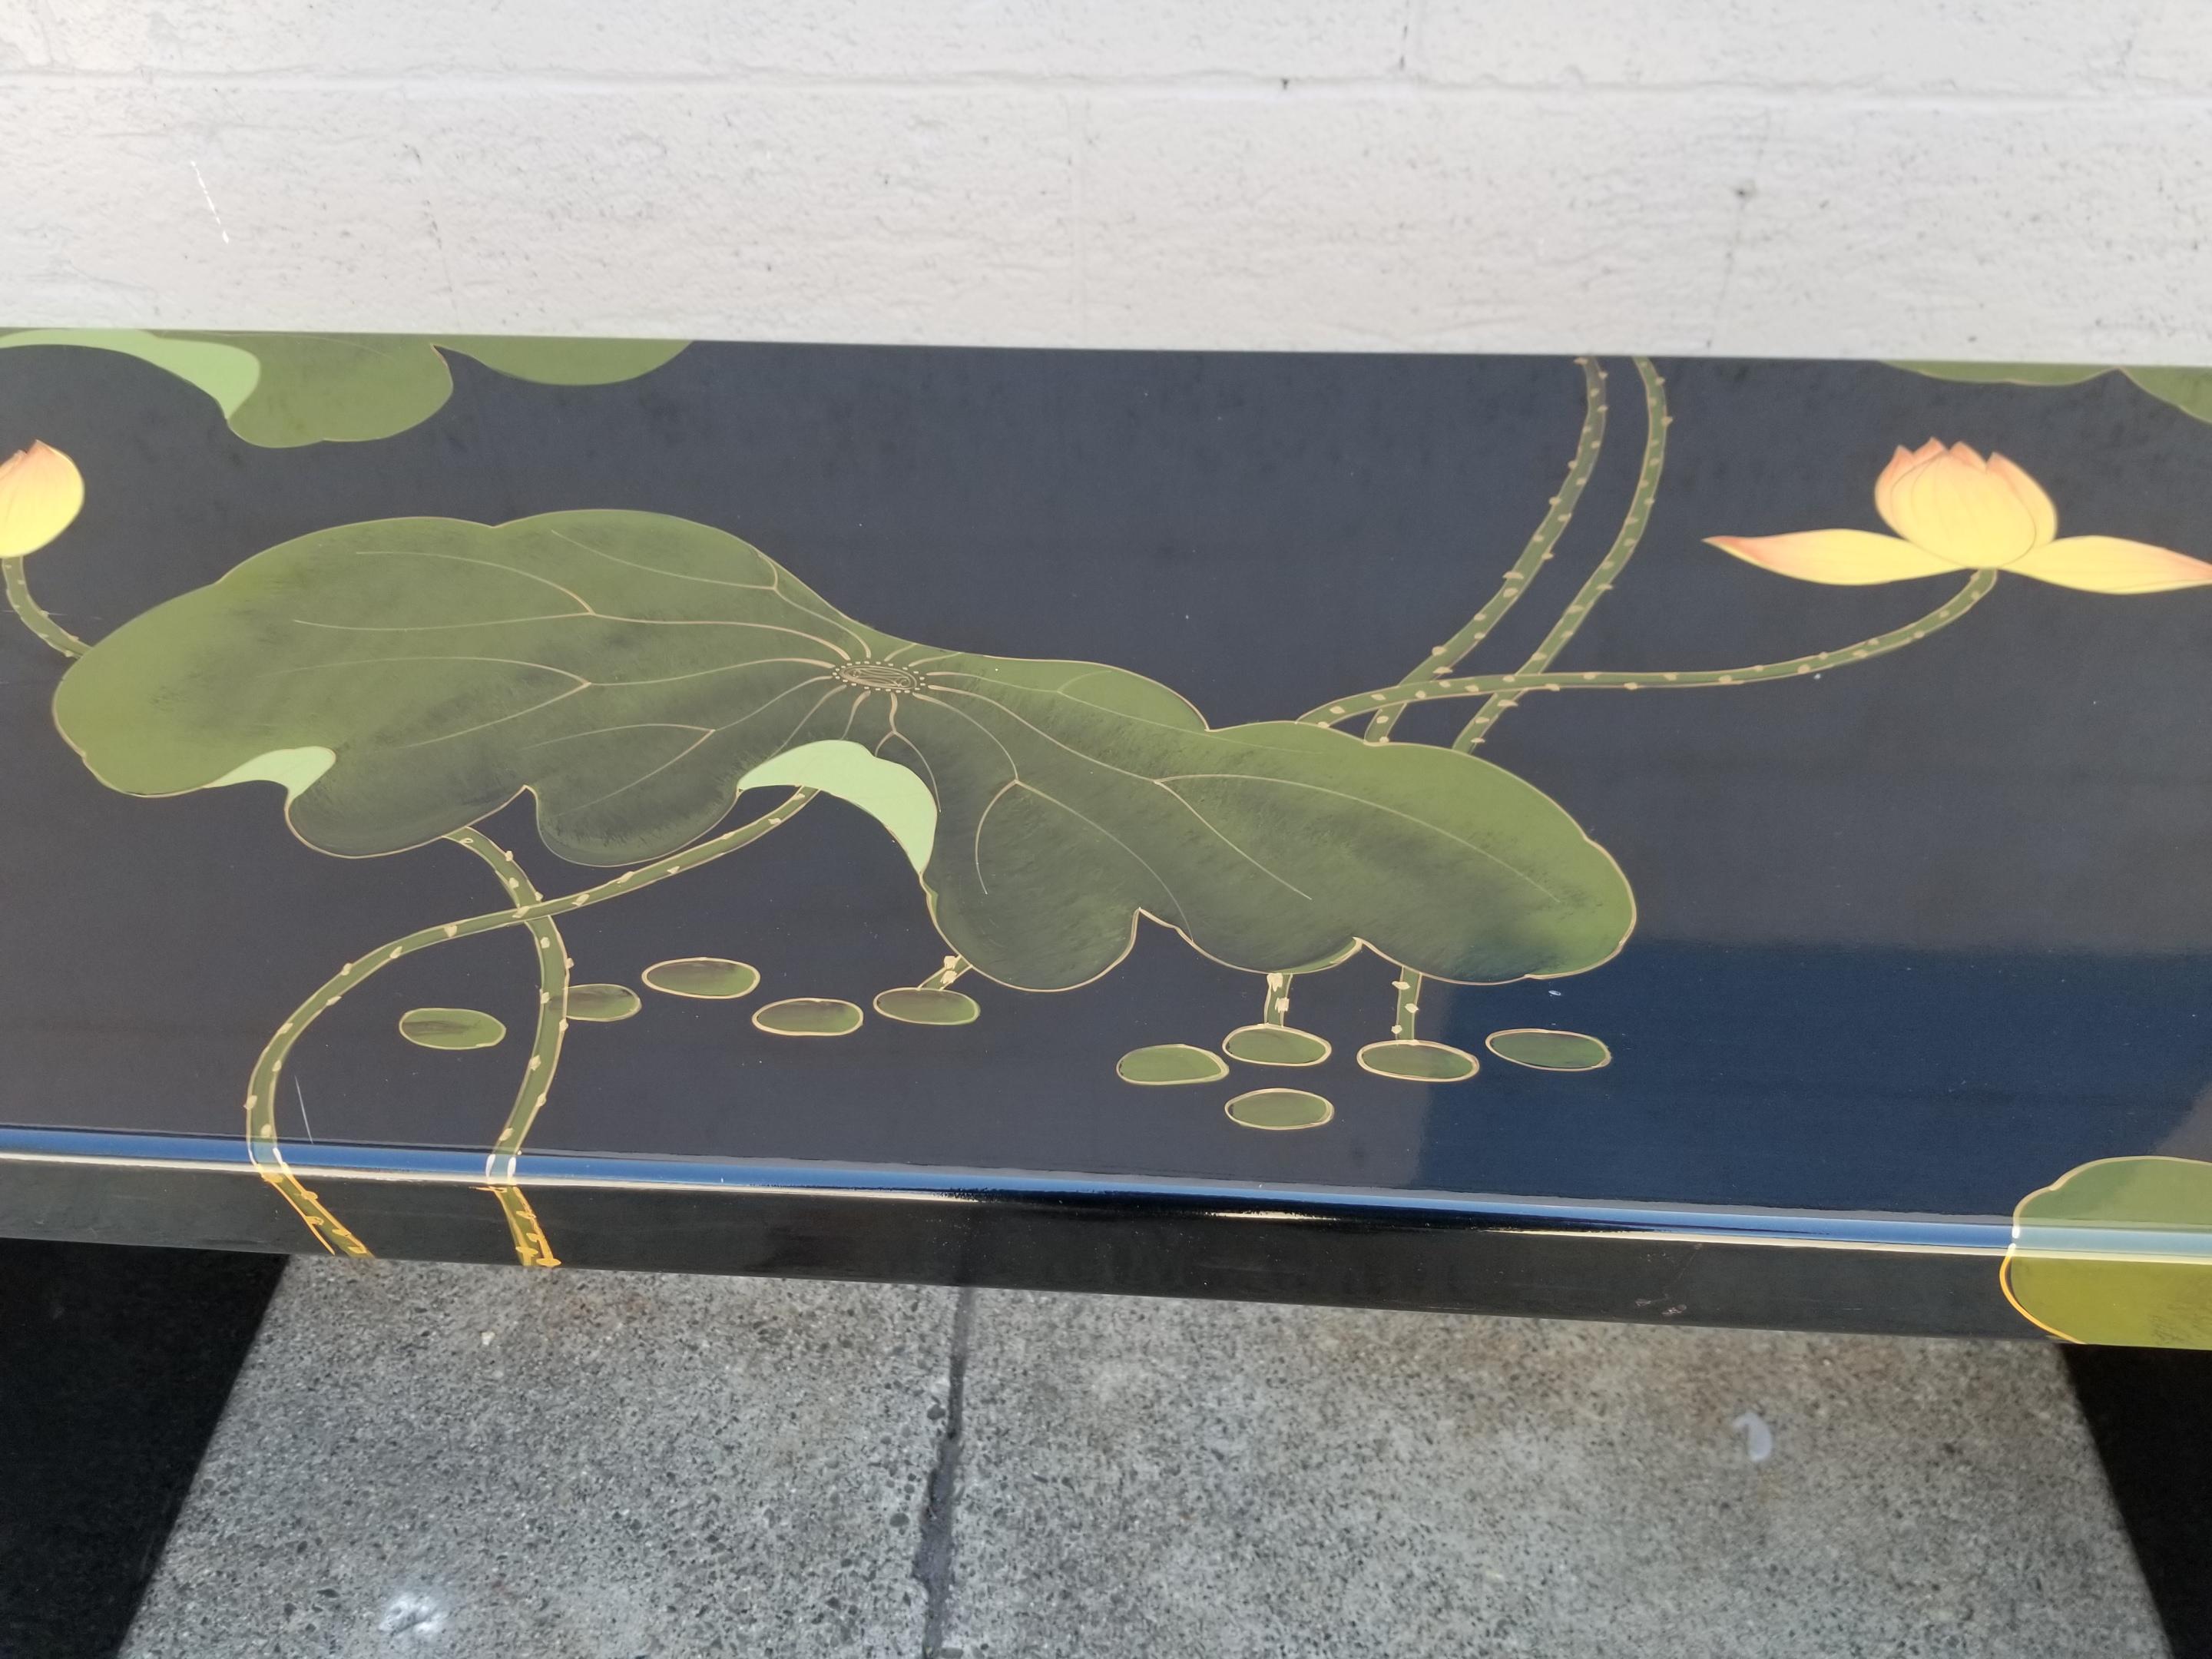 A mid to late 20th century Asian lacquered console table with lily pad flora. Bold contrasting color palate with black, green and yellow. Please check our postings for a pair of accompanying pedestals / stools.